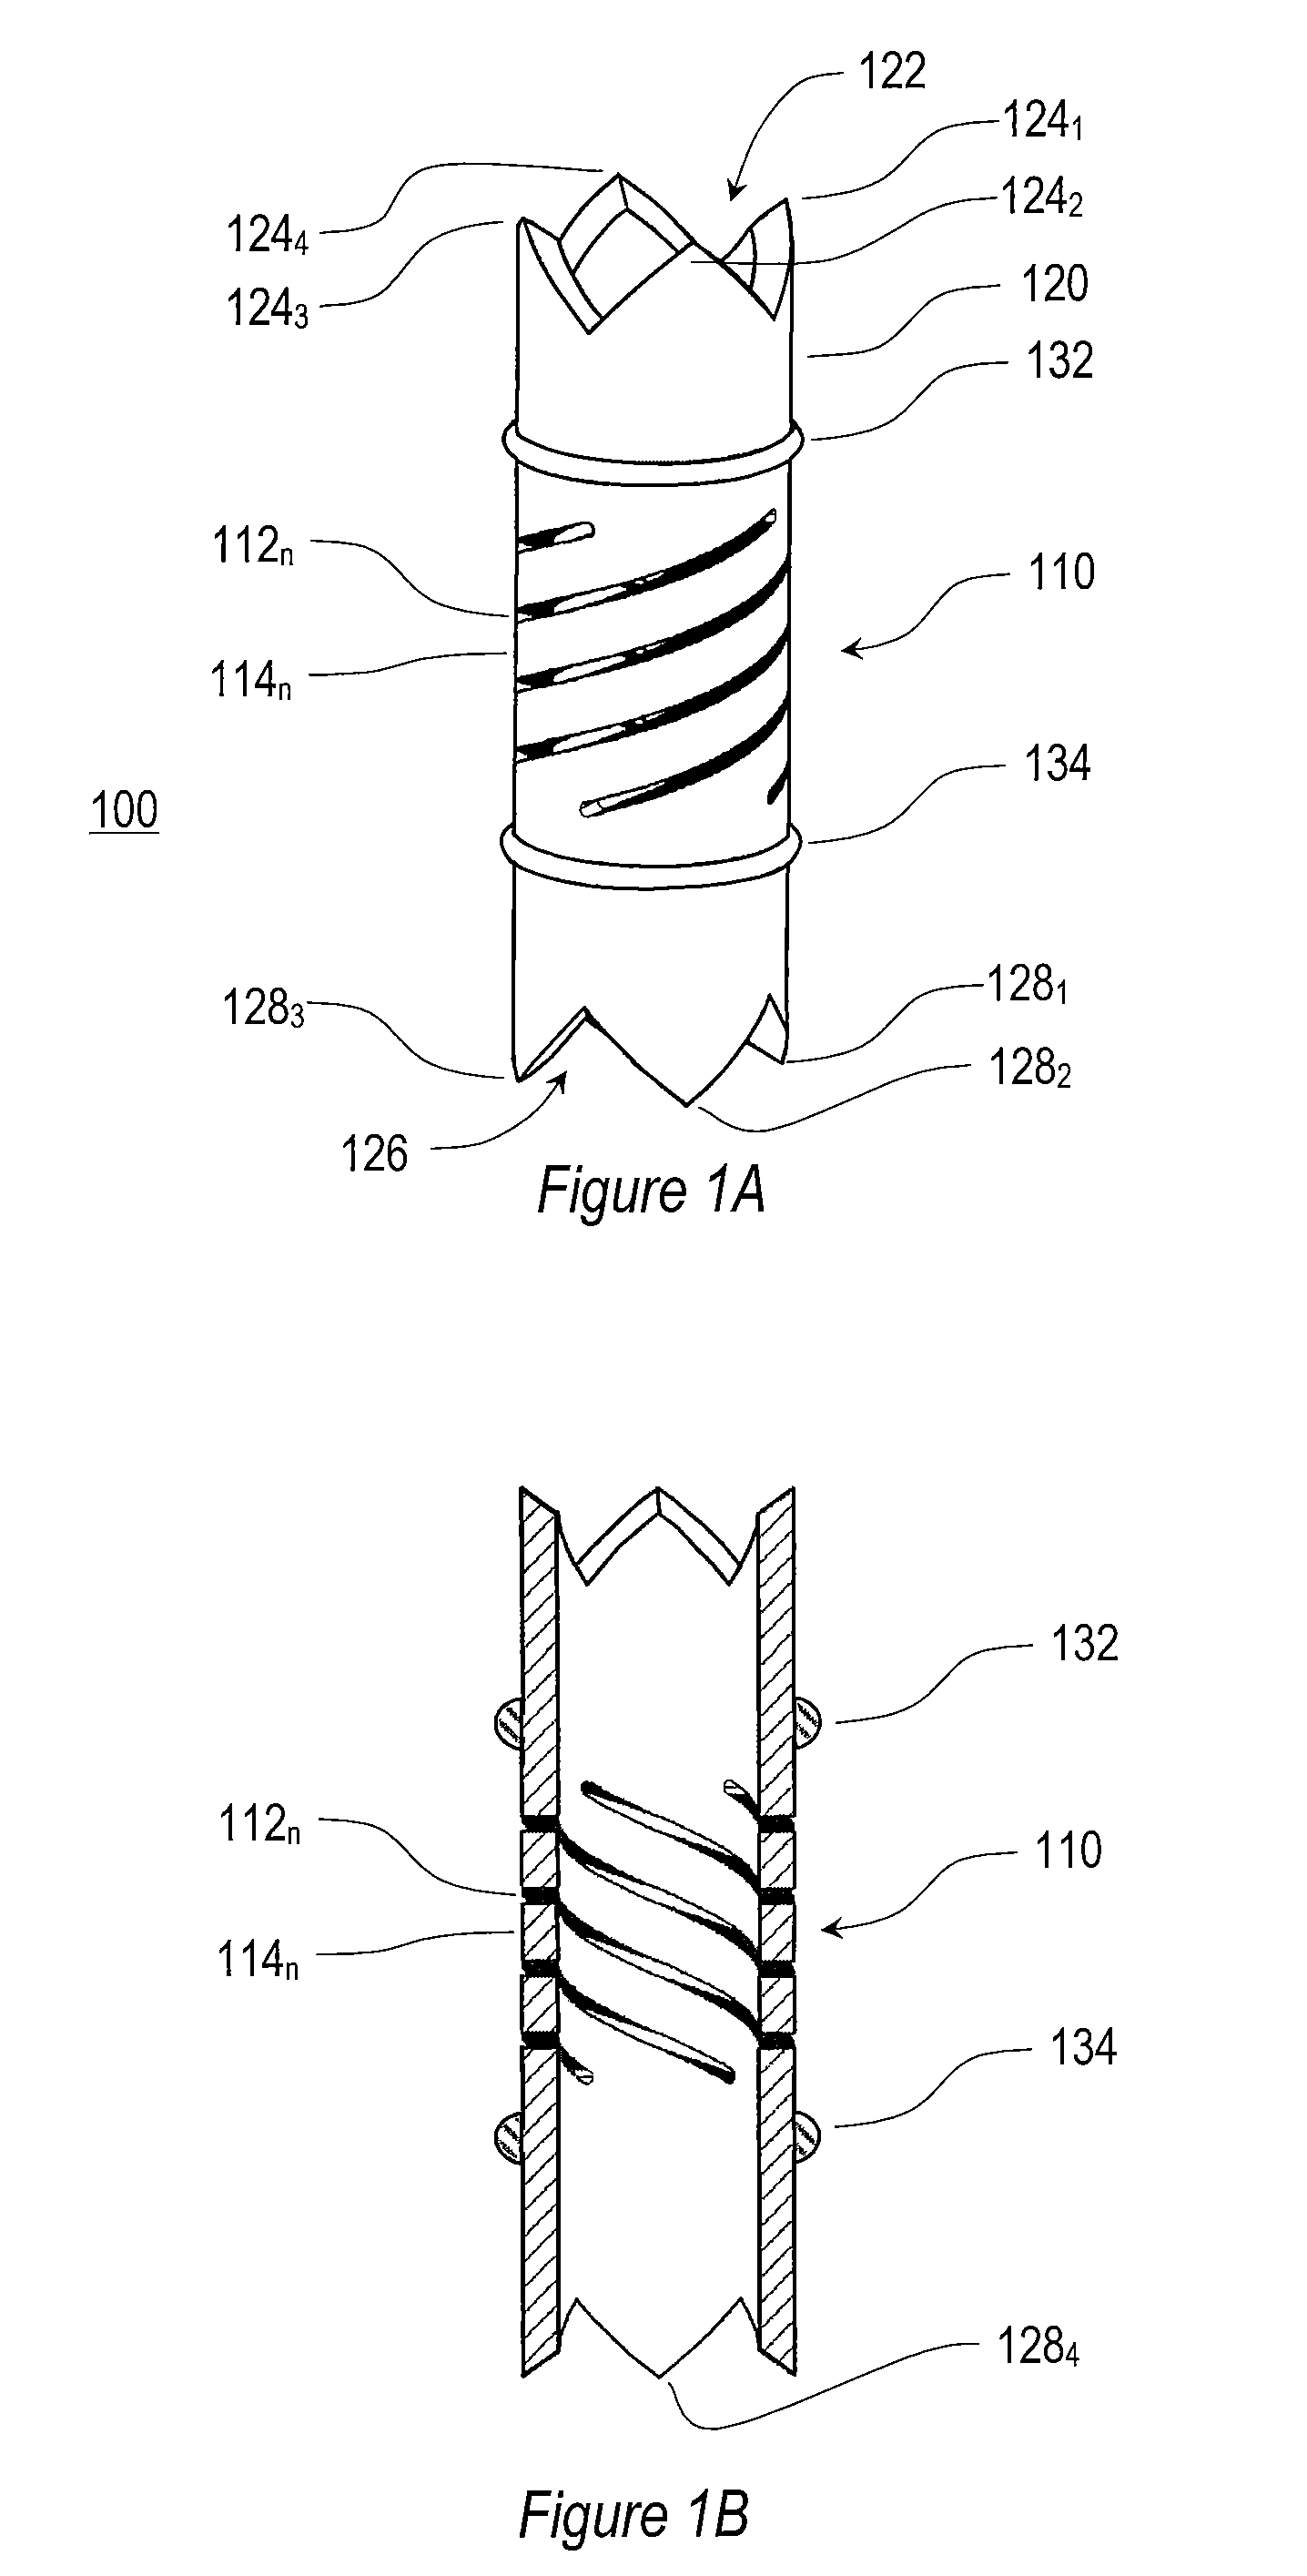 Self-cleaning socket for microelectronic devices